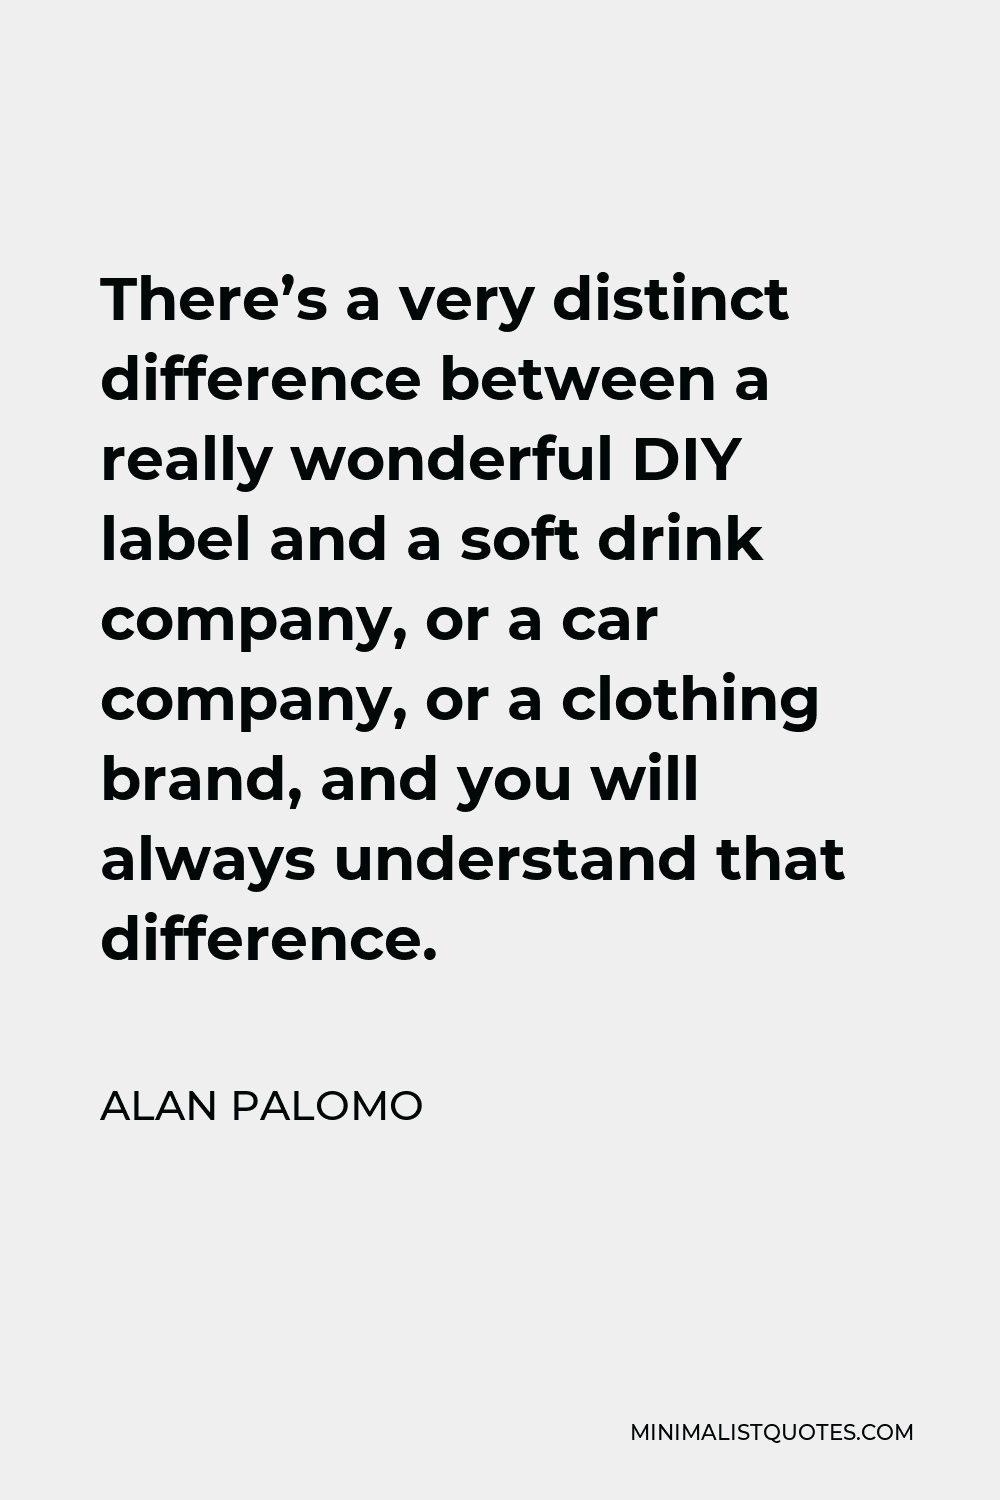 Alan Palomo Quote - There’s a very distinct difference between a really wonderful DIY label and a soft drink company, or a car company, or a clothing brand, and you will always understand that difference.